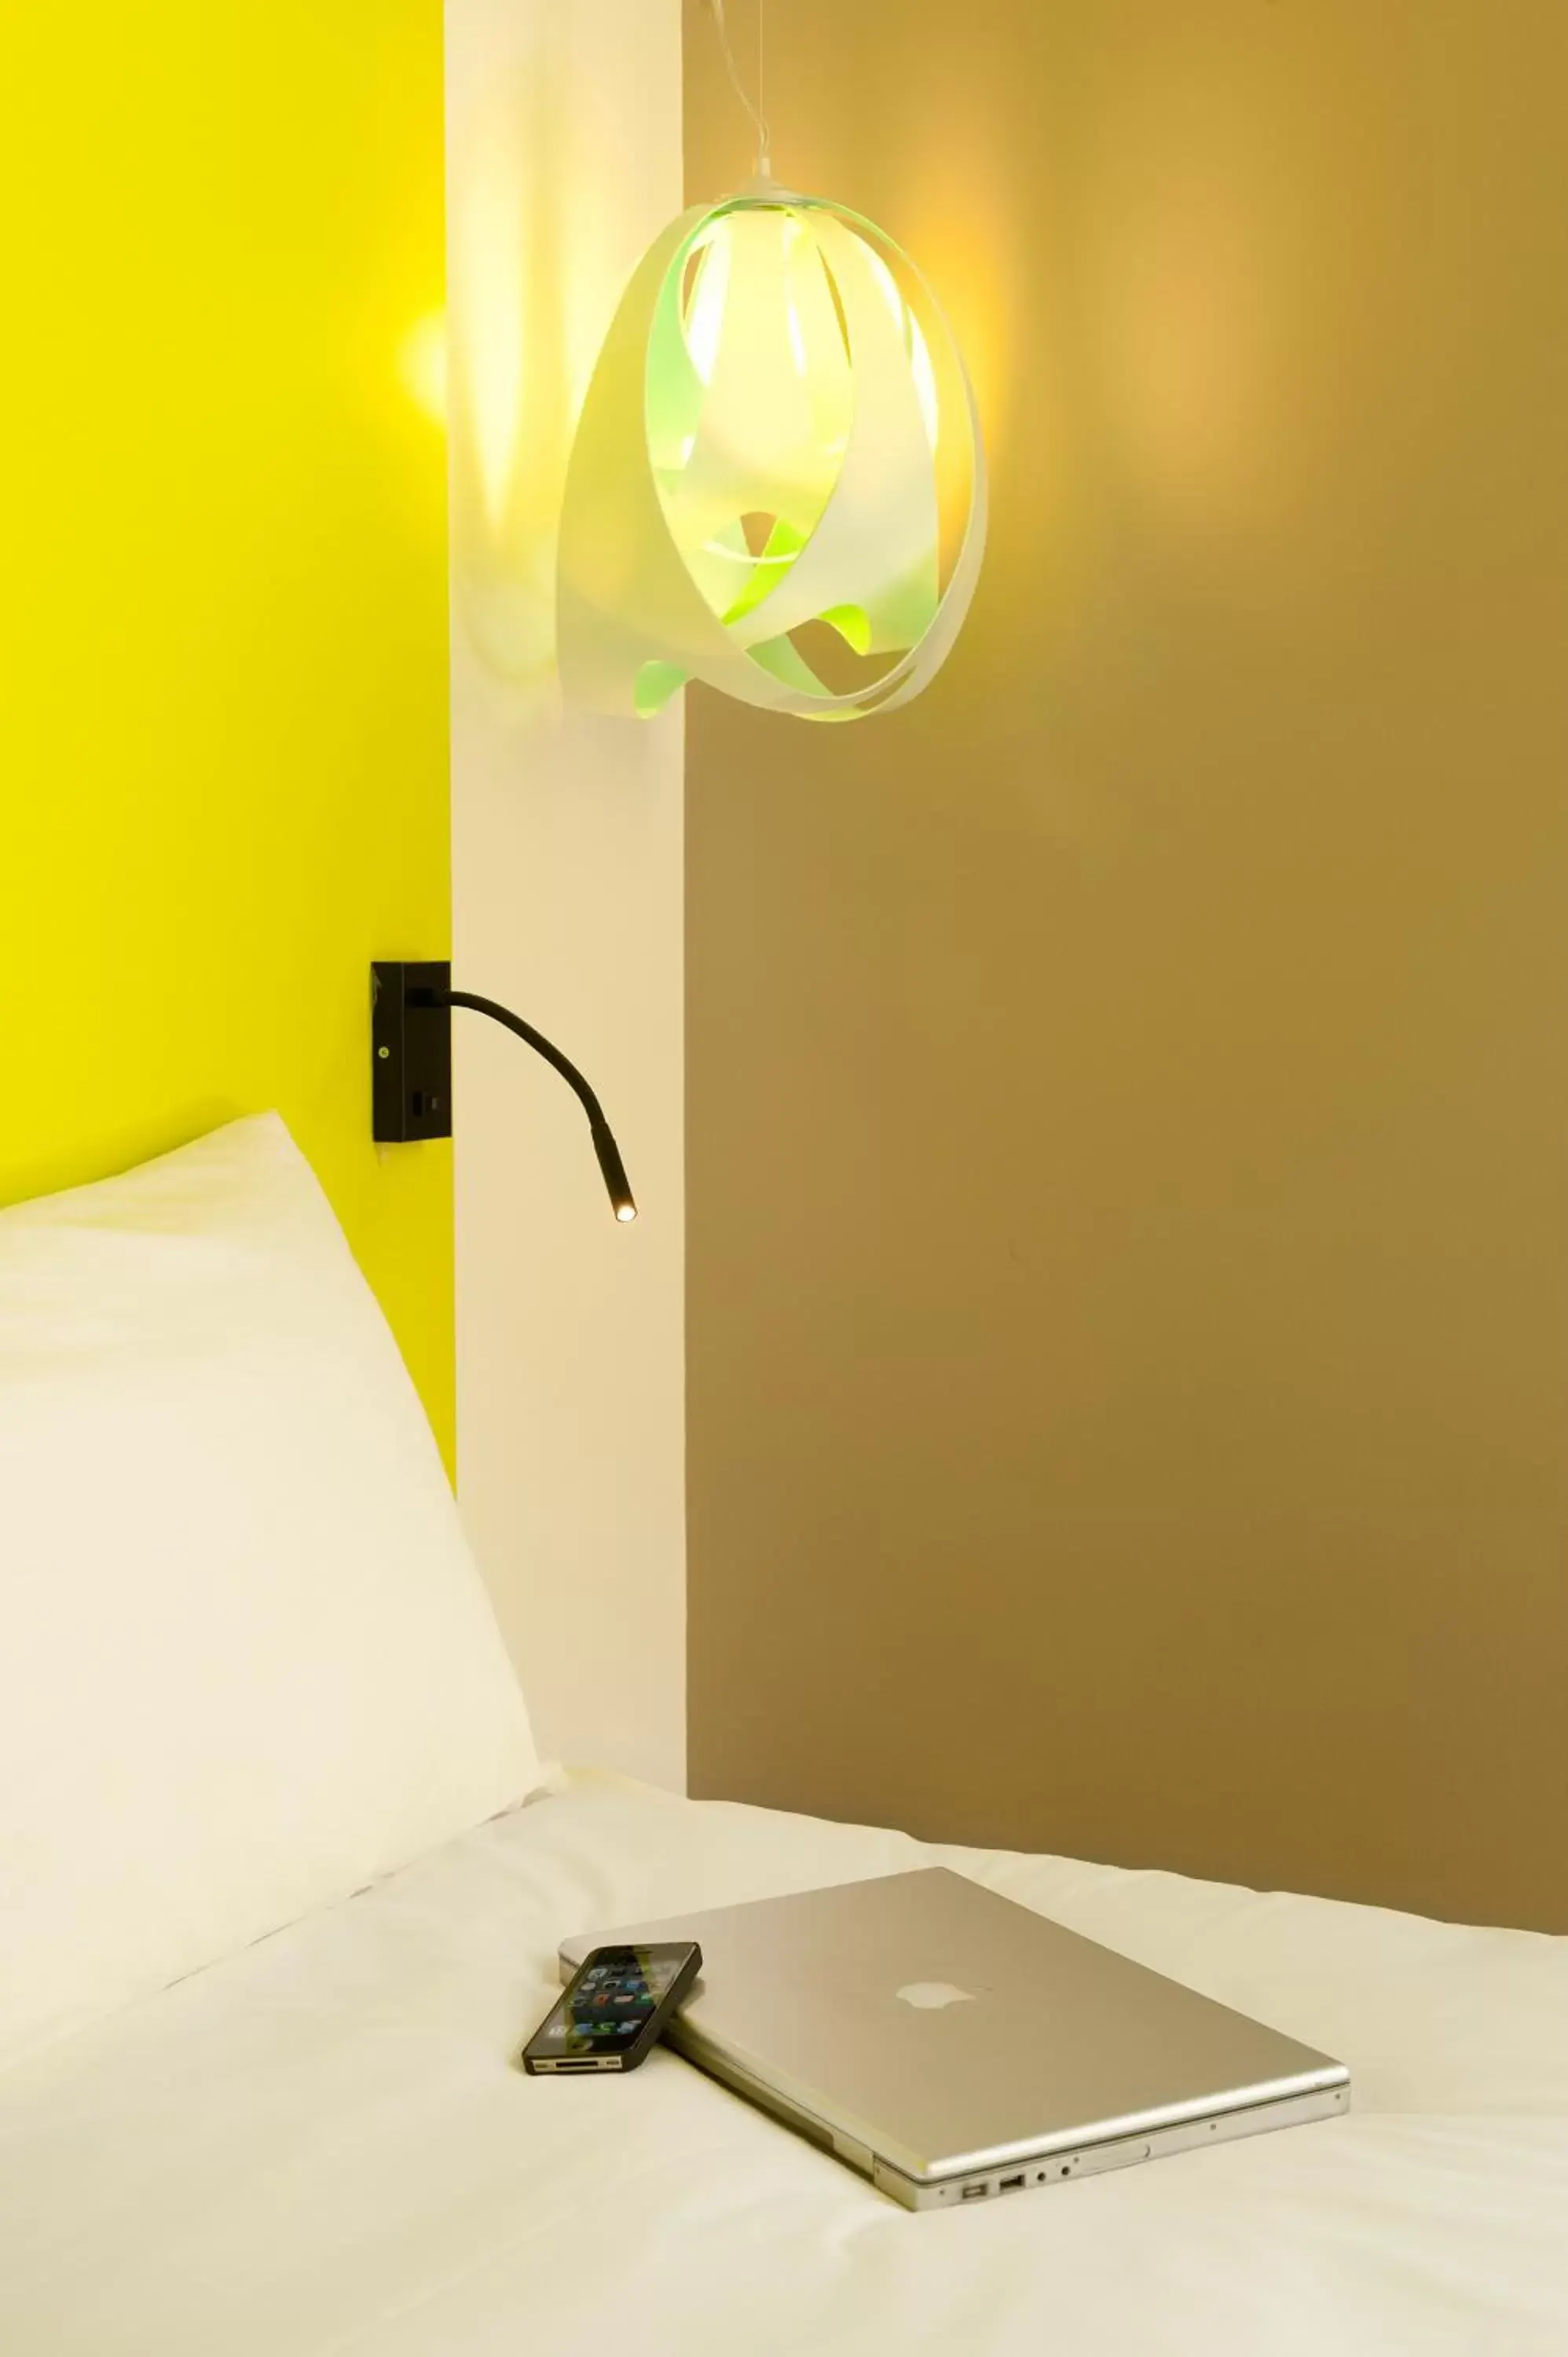 Bed in ibis Styles Nimes Gare Centre